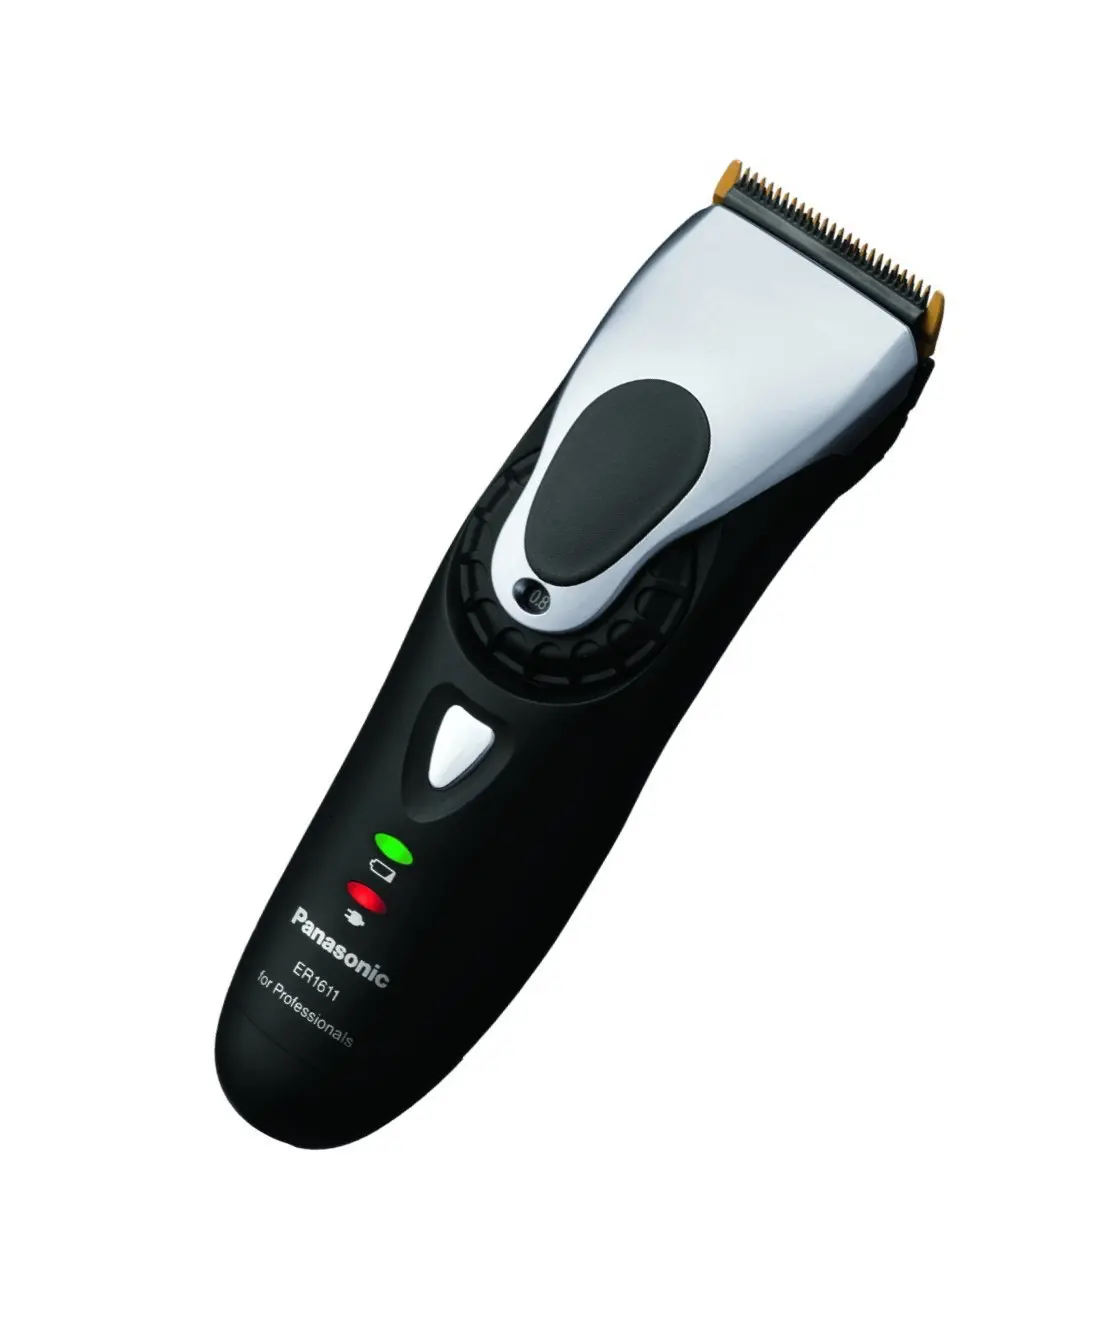 cordless hair clippers and trimmers